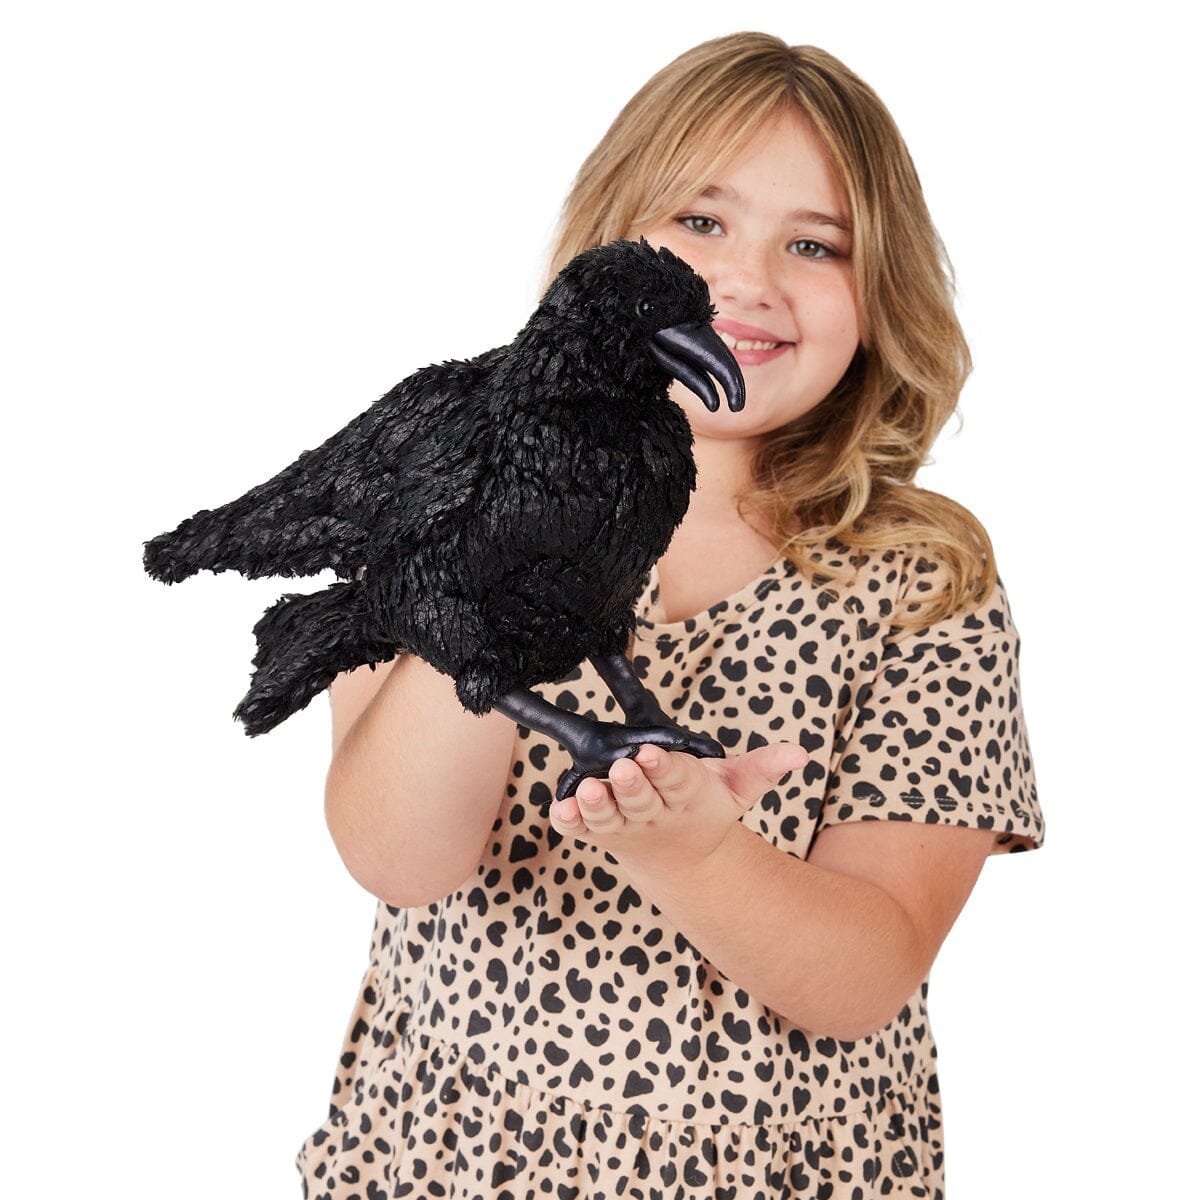 Crow or Raven Puppet toys Louise Kool & Galt for child care day care primary classrooms